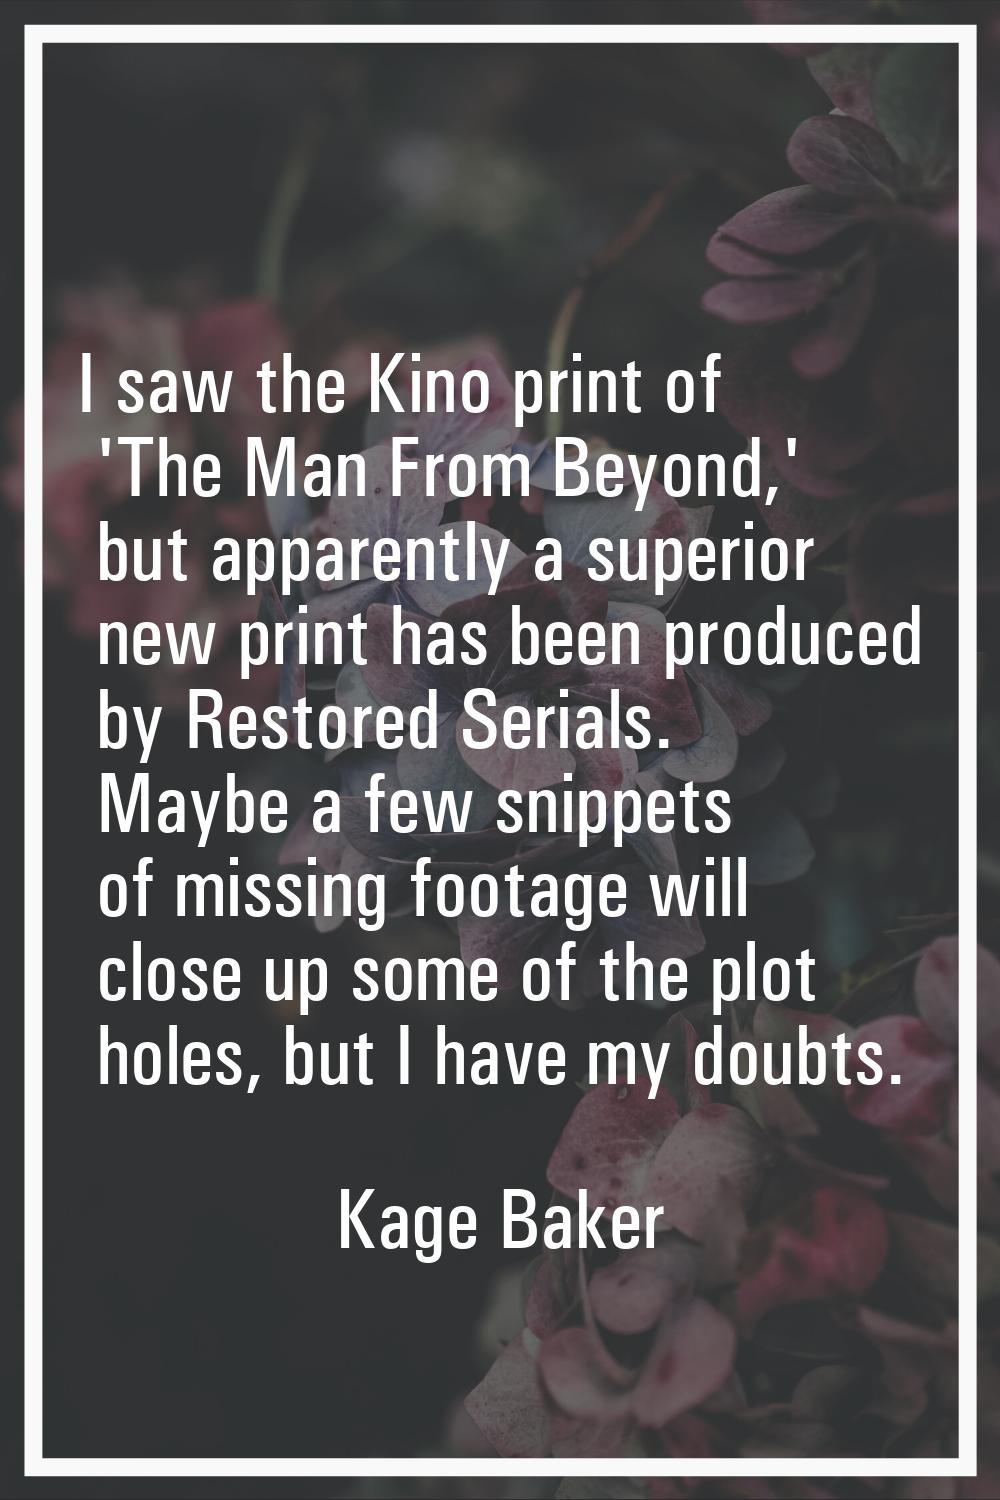 I saw the Kino print of 'The Man From Beyond,' but apparently a superior new print has been produce